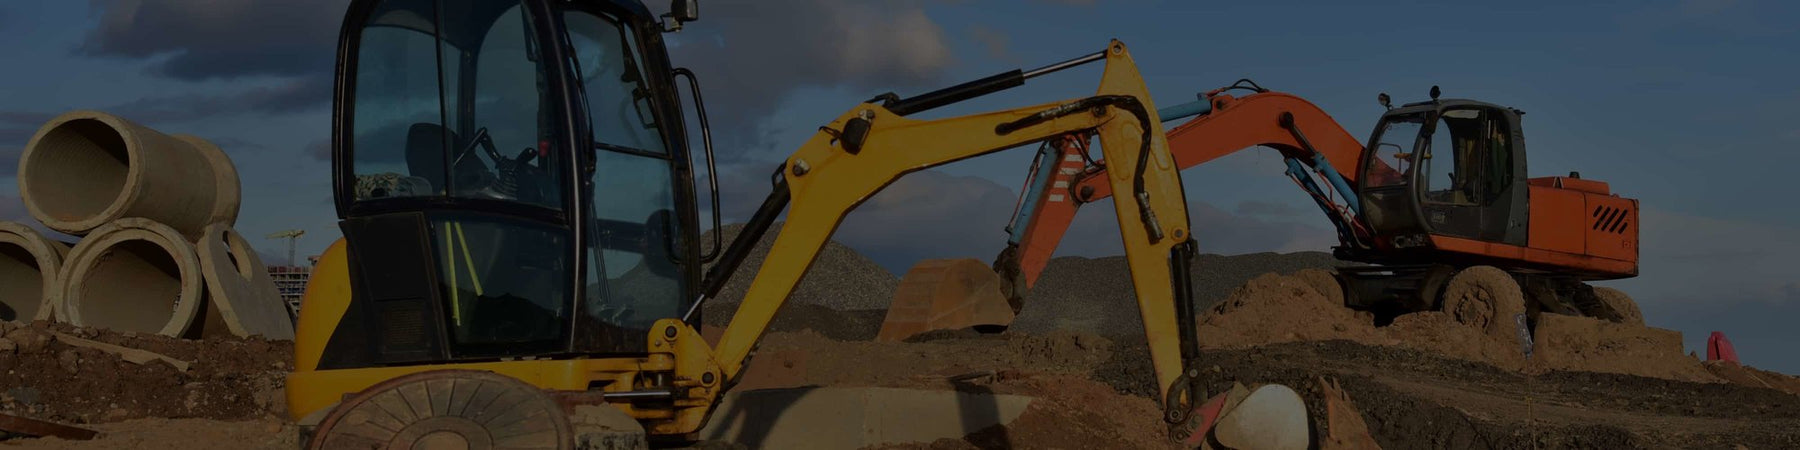 The Best Mini Excavator Attachments to Increase Your Machine’s Capabilities